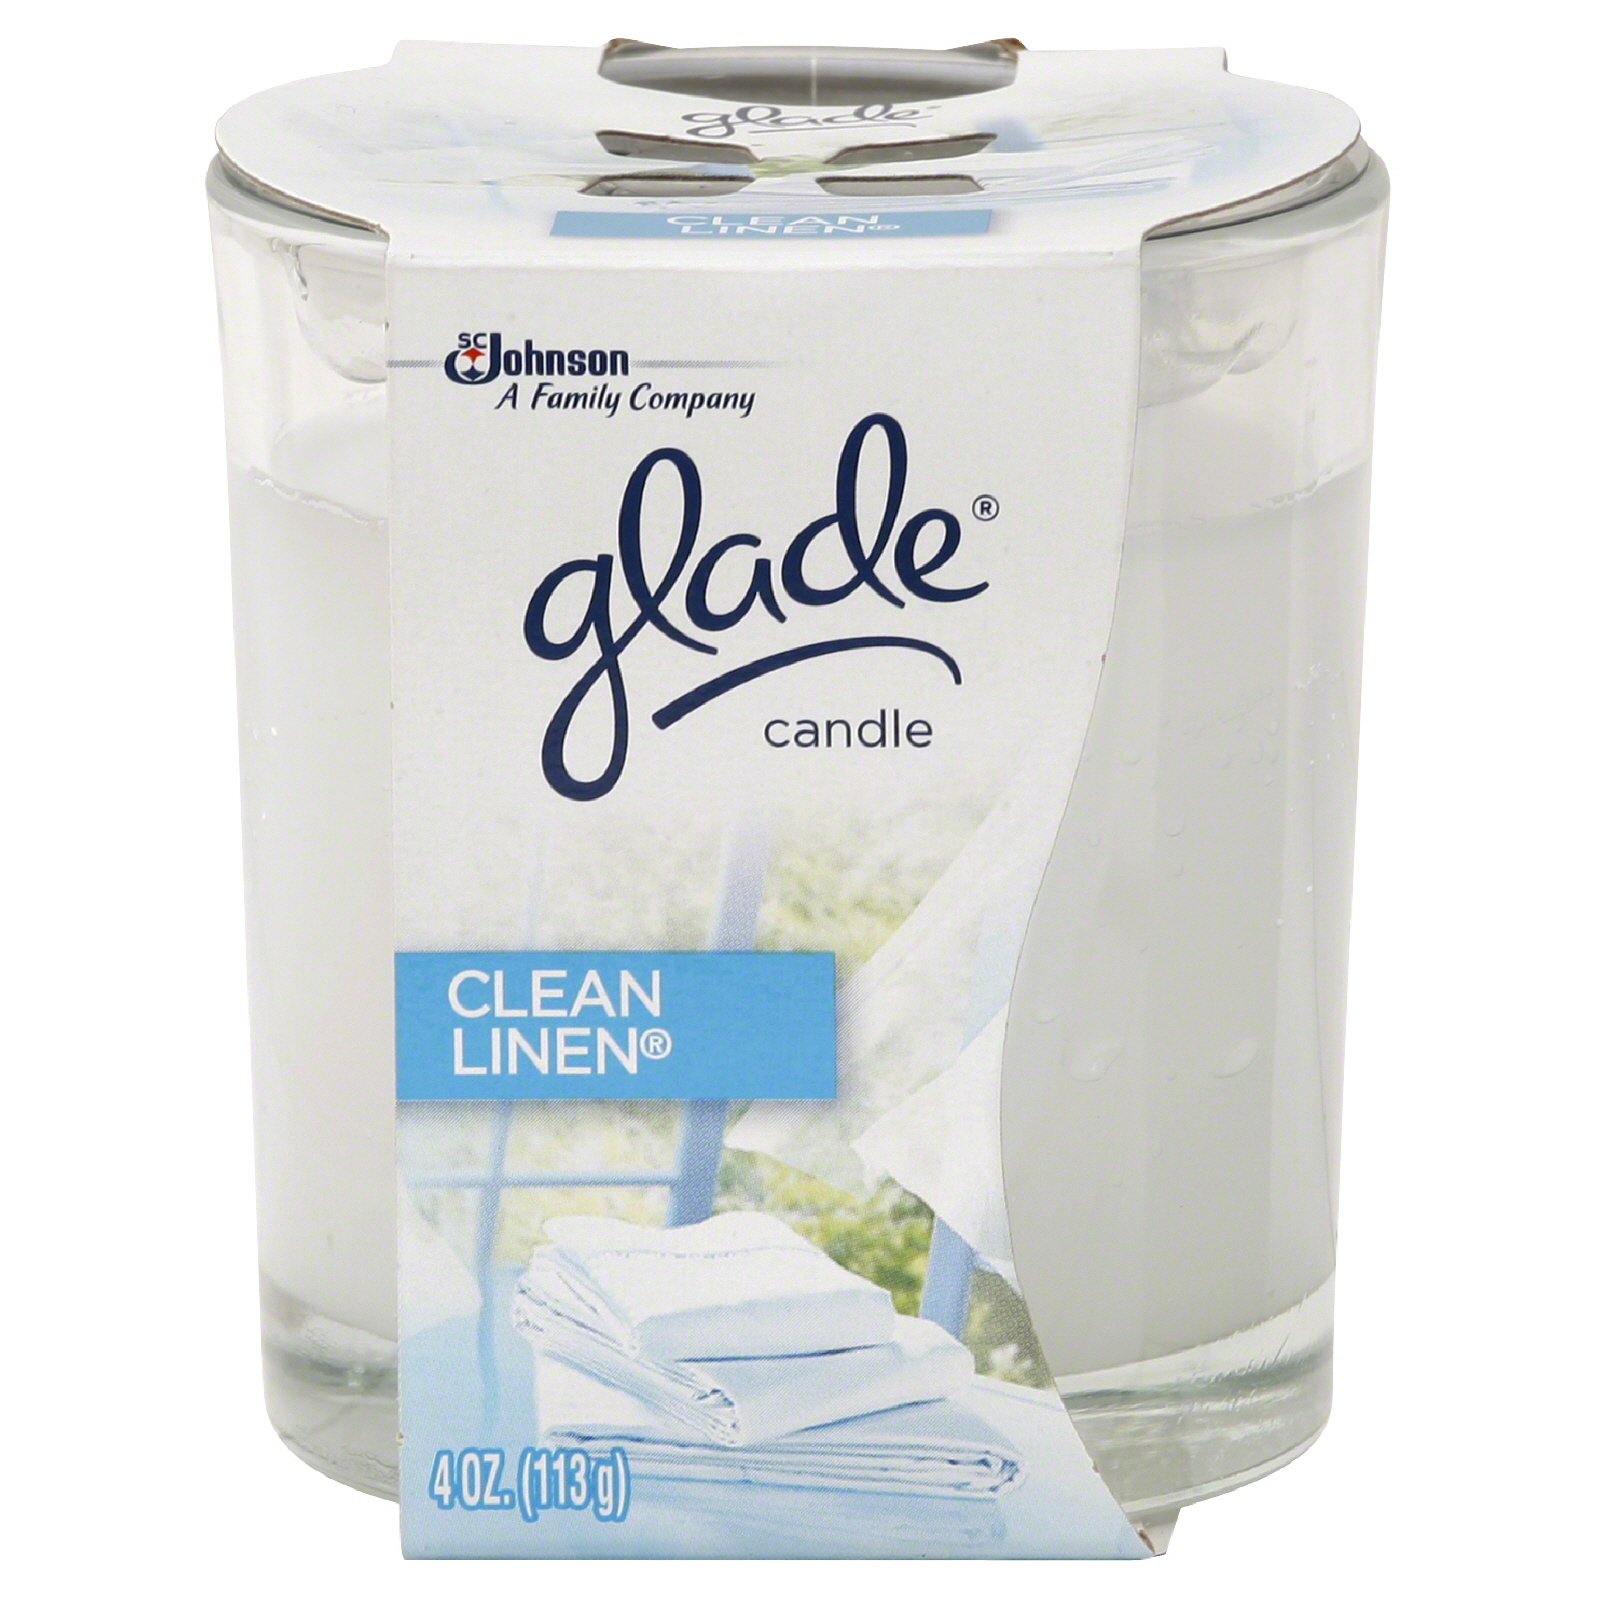 Glade Candle, Clean Linen, 4 oz (113 g)